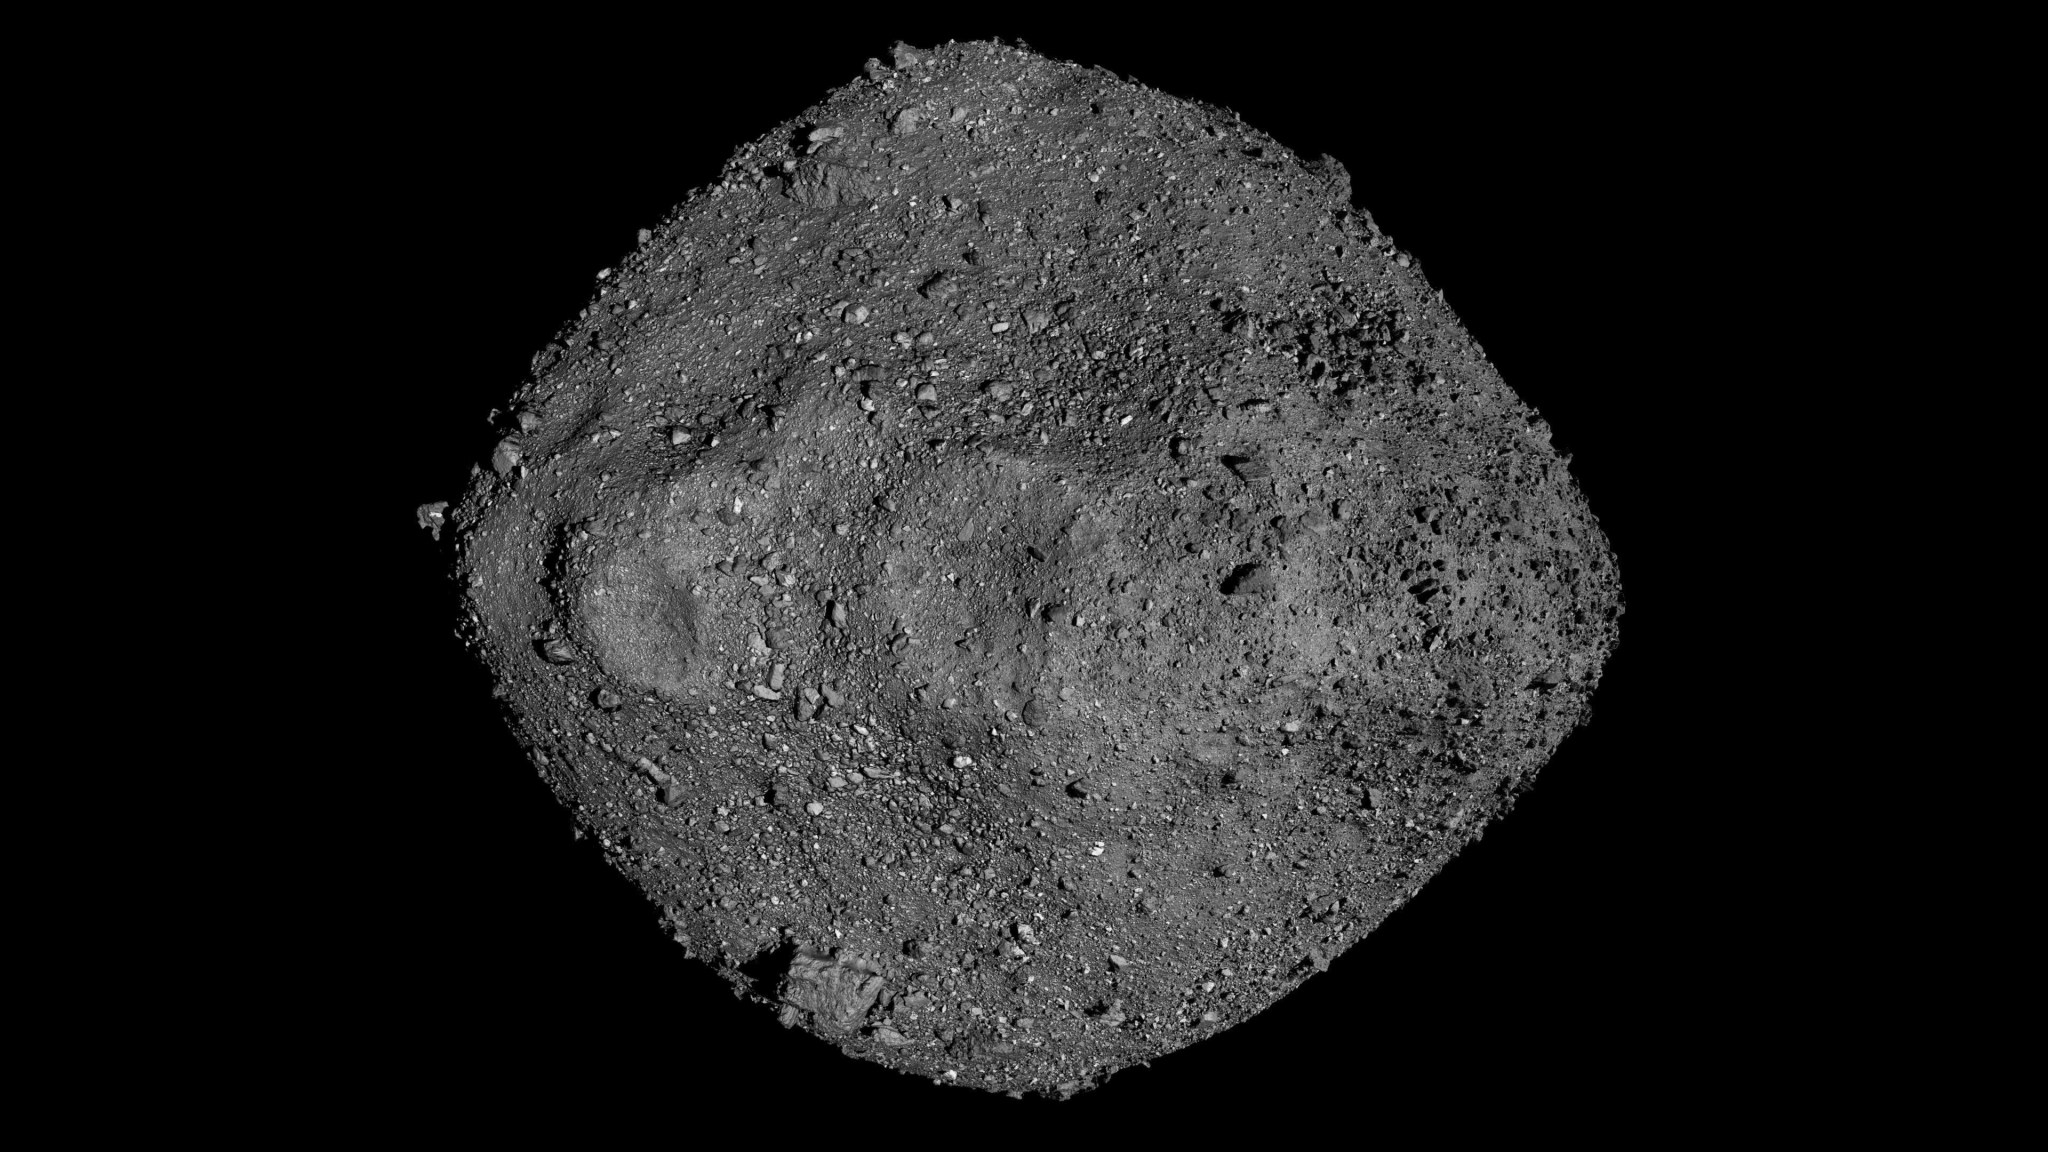 This mosaic of Bennu was created using observations made by NASA’s OSIRIS-REx spacecraft that was in close proximity to the asteroid for over two years.